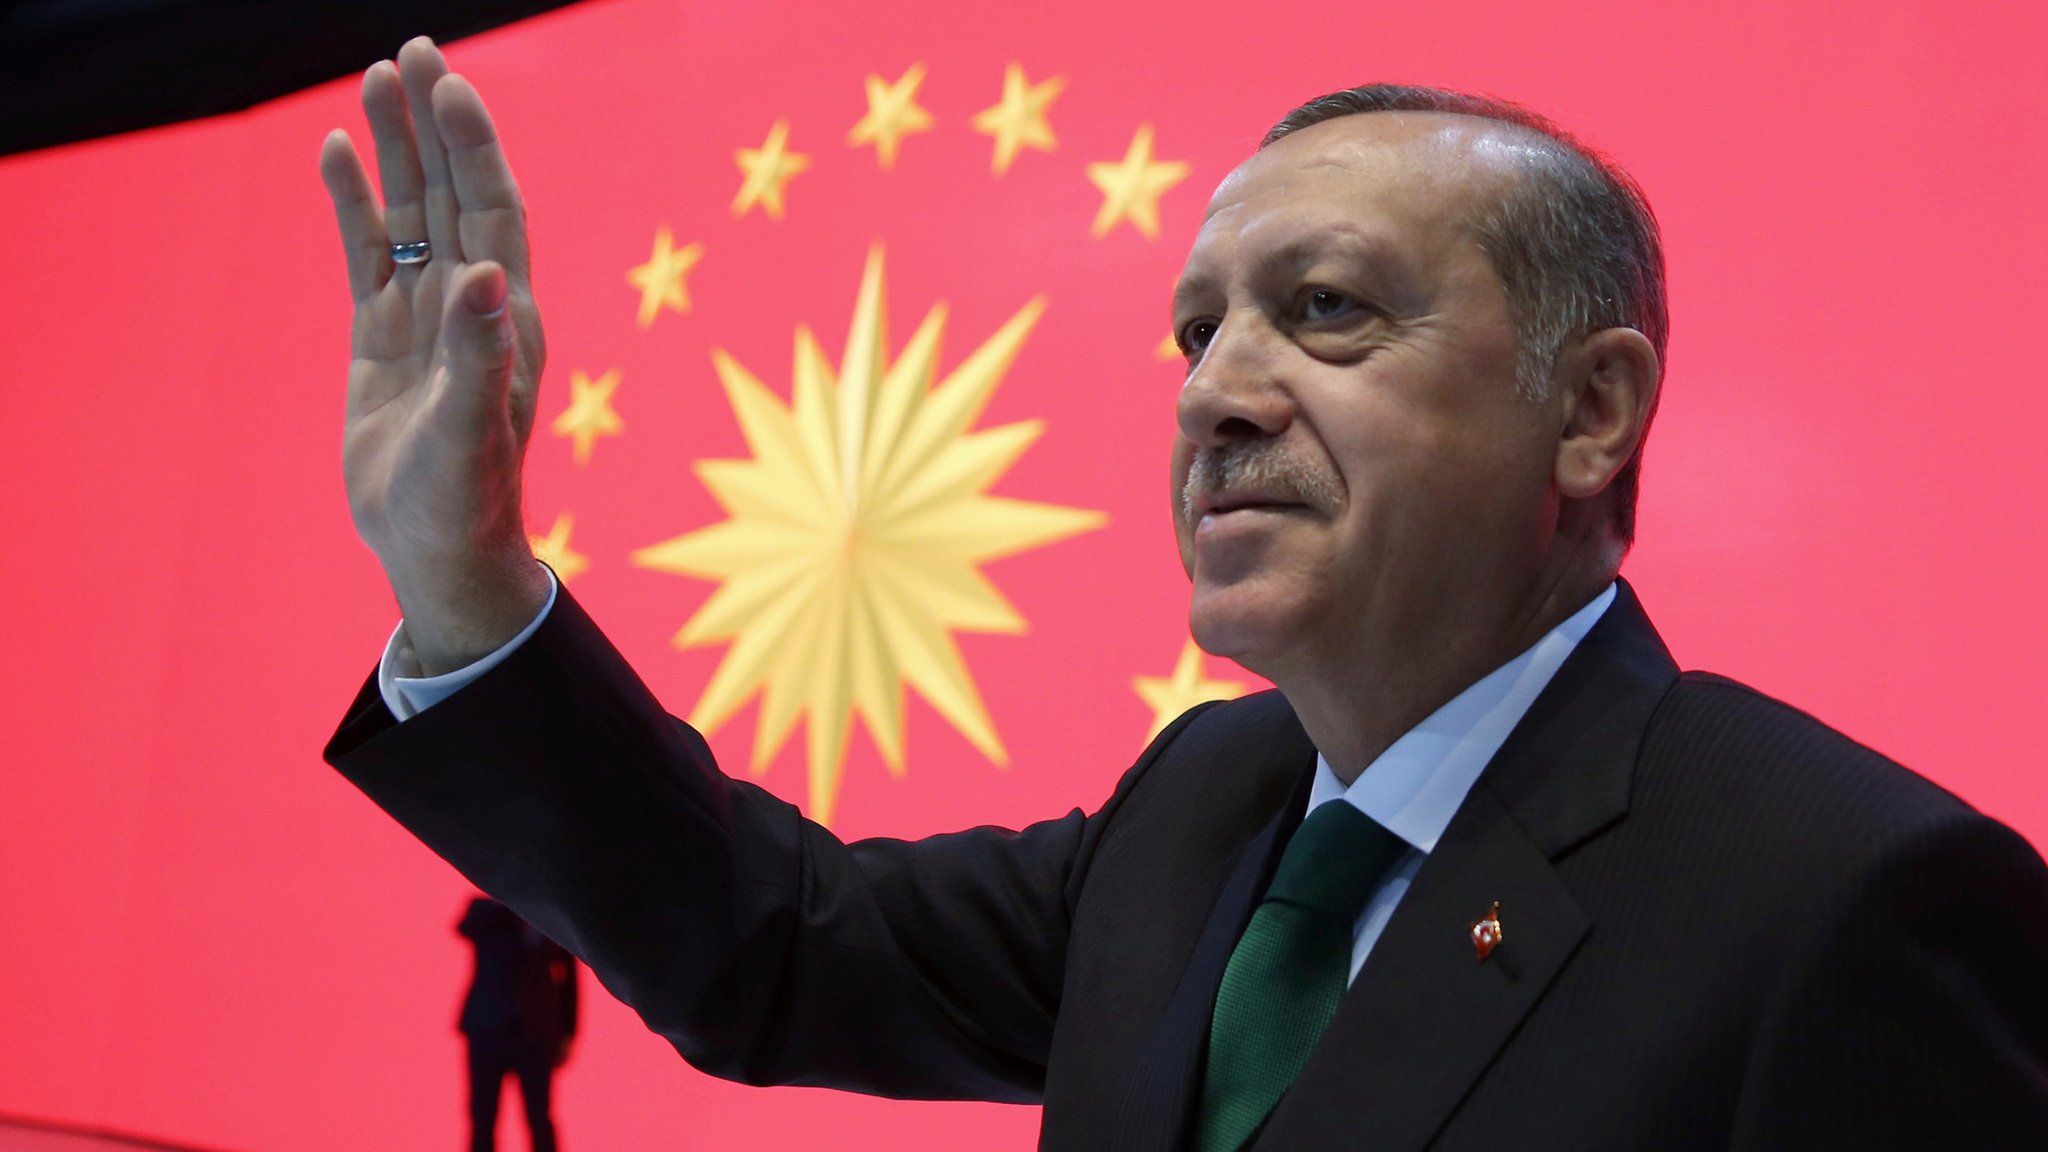 Turkey"s President Recep Tayyip Erdogan waves to his supporters during a meeting in Istanbul, Monday, March 27